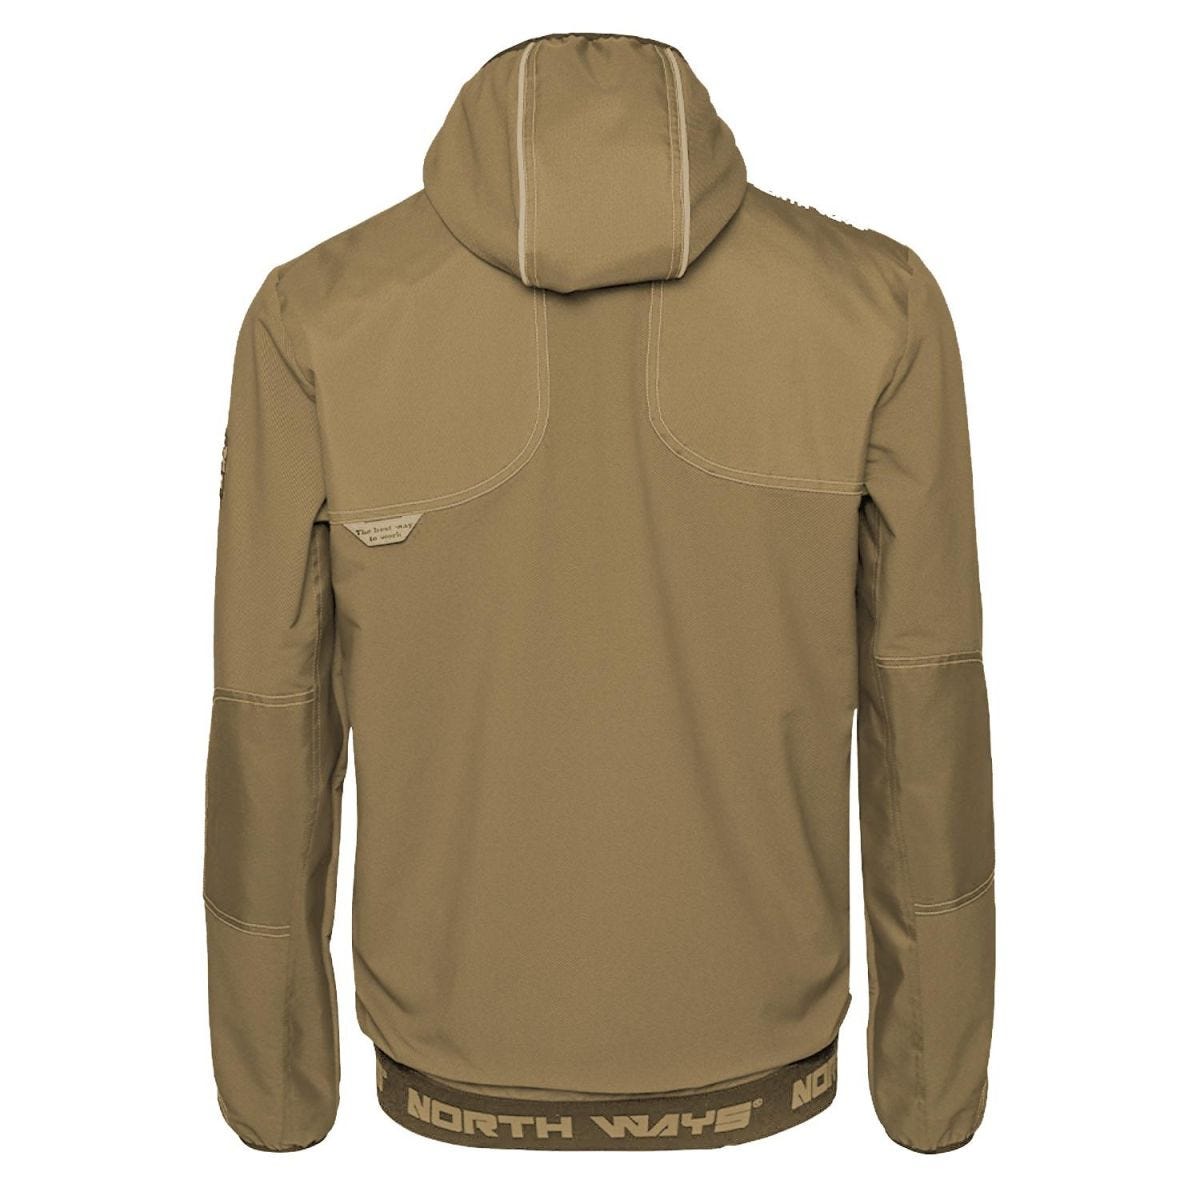 Blouson de travail multipoches Irons beige - North Ways - Taille XL 2